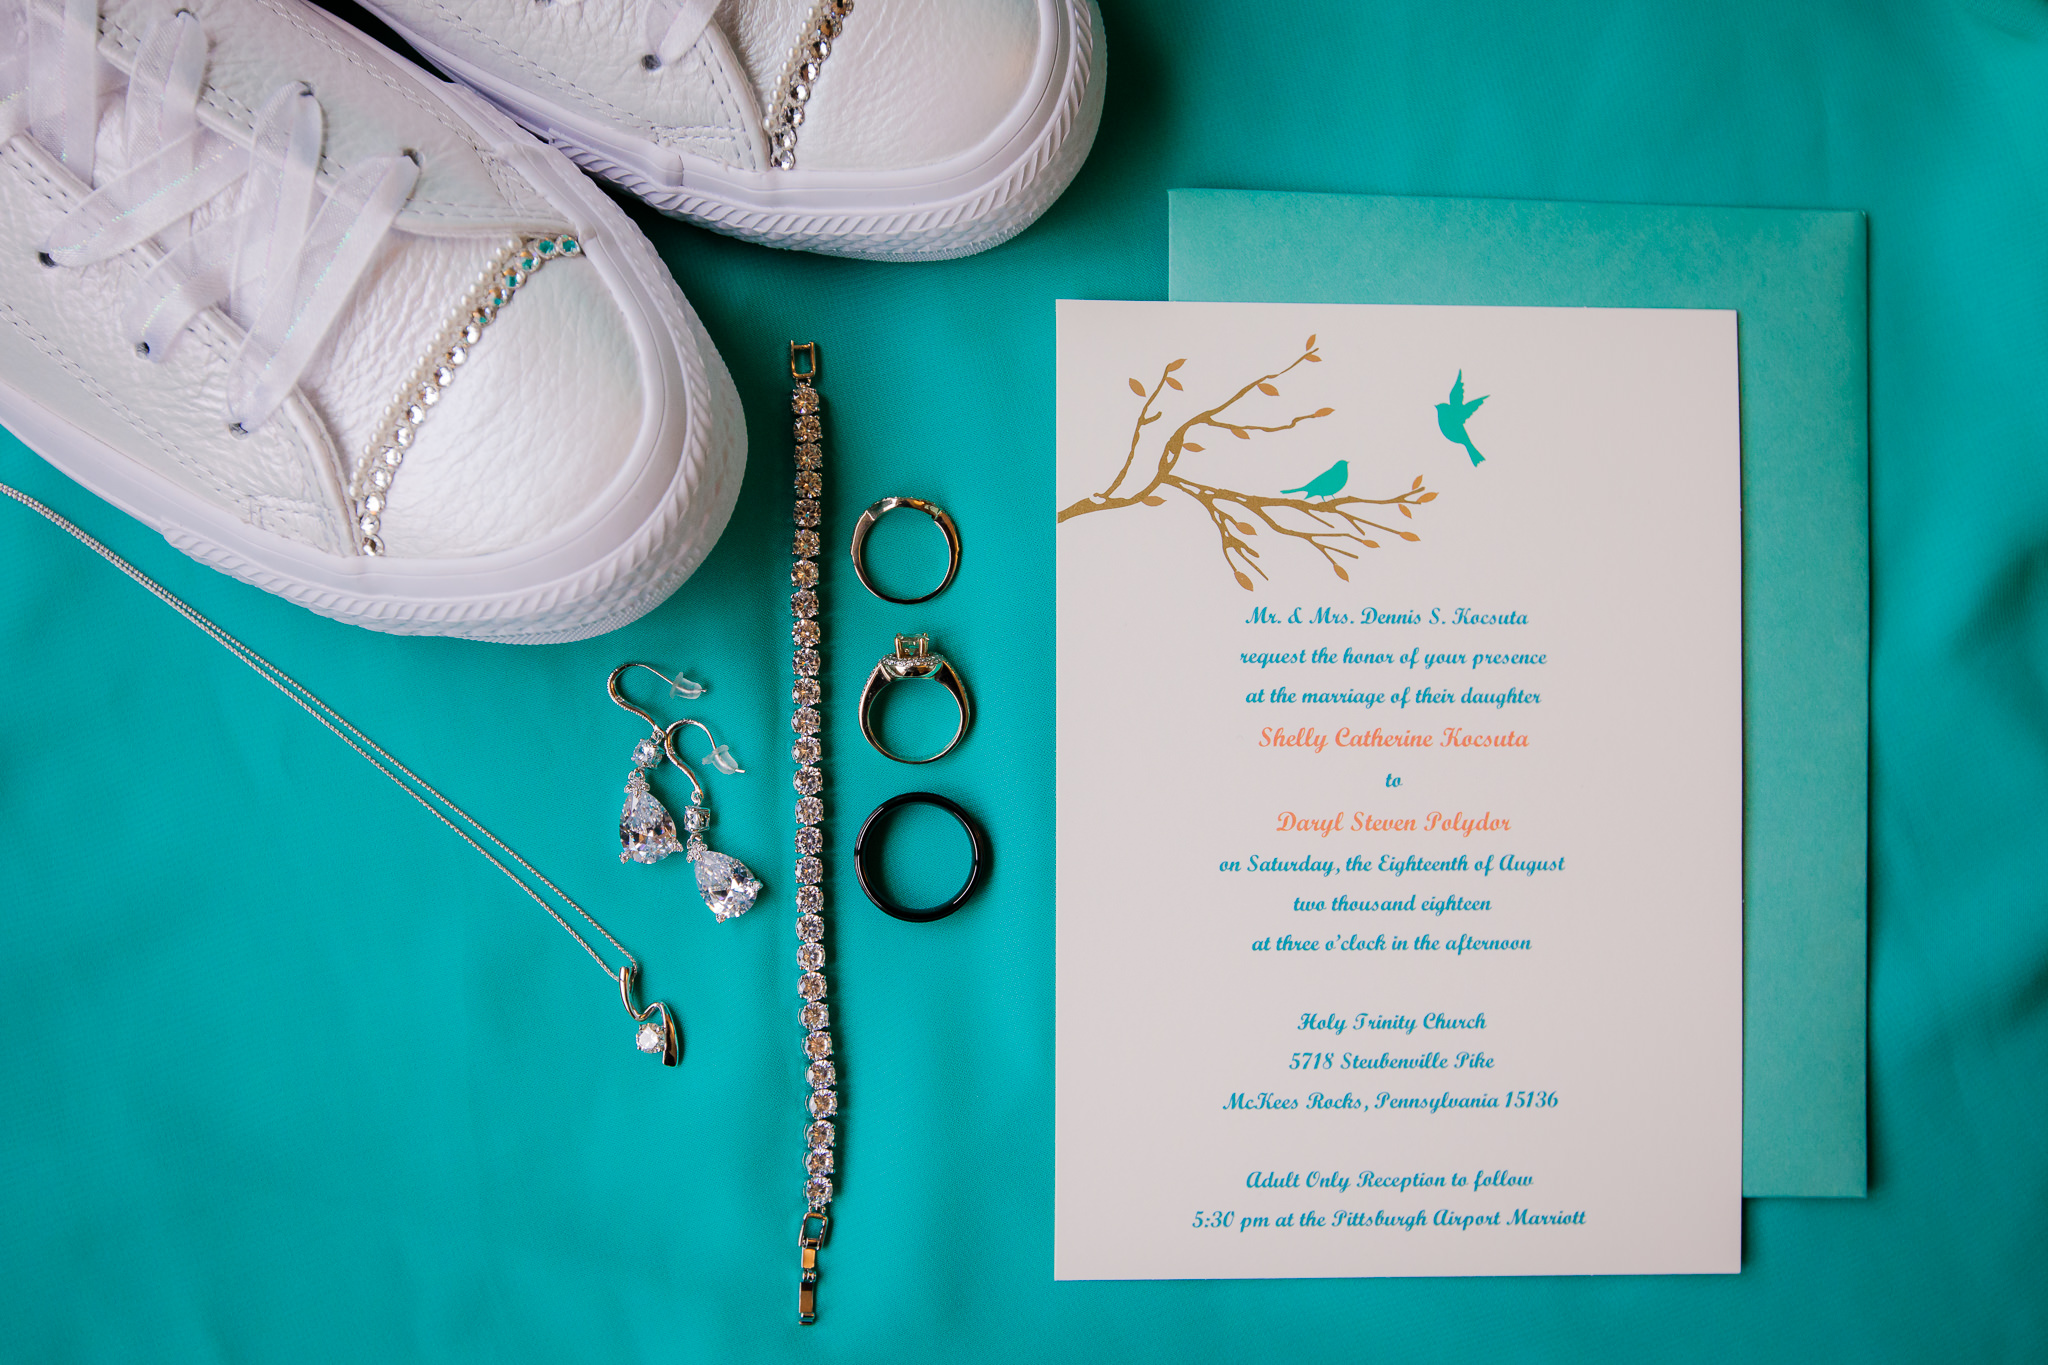 Bride's details laid out on a turquoise bridesmaid dress